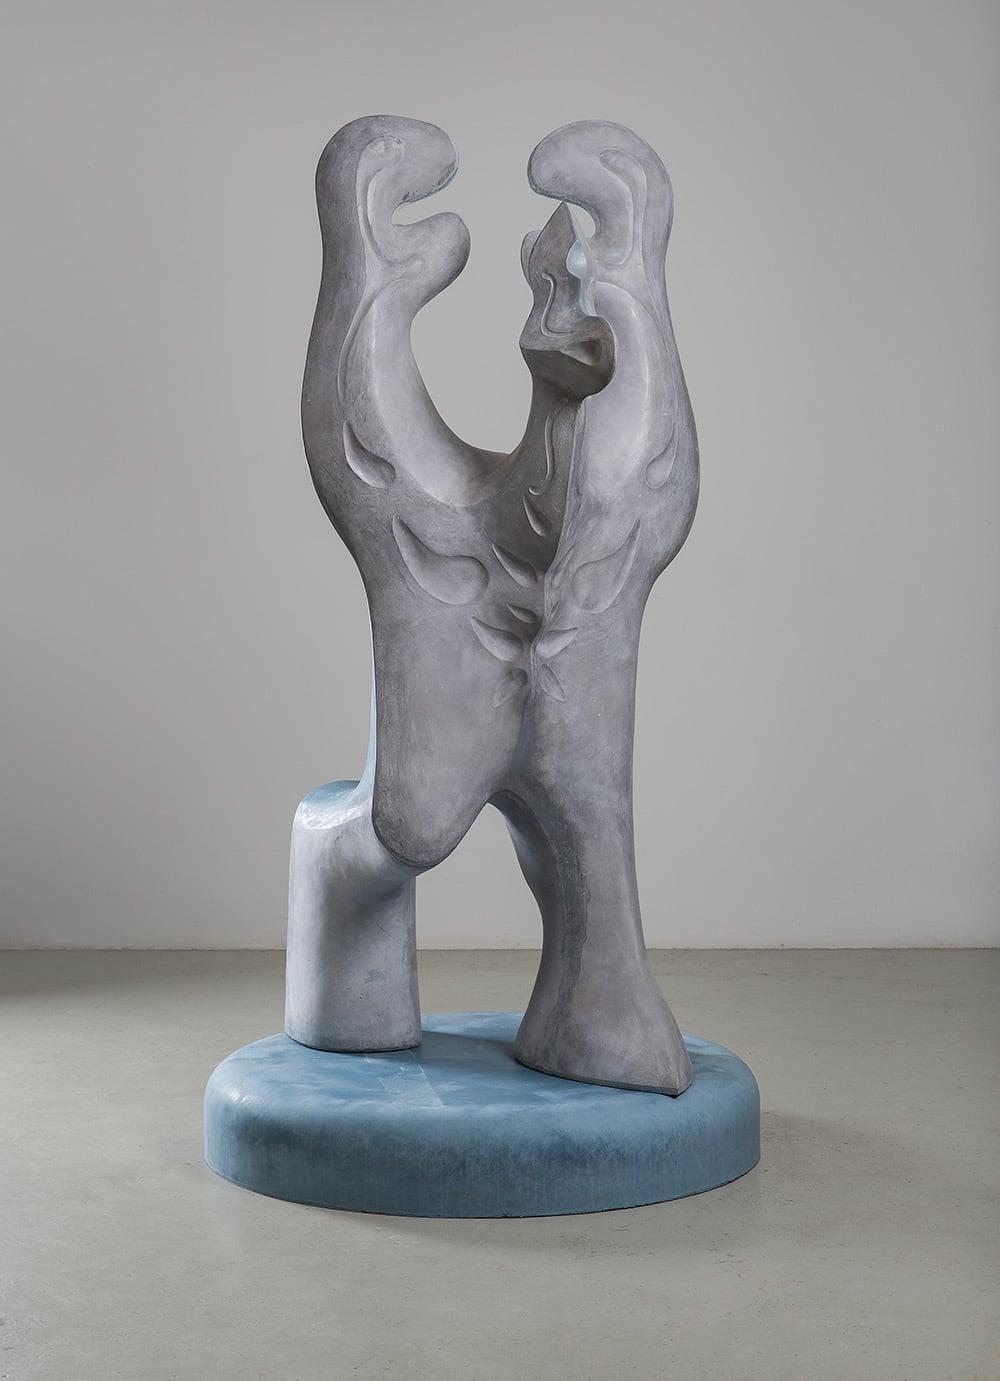 Big Creature is a unique glass fiber reinforced concrete (blue/grey) sculpture by contemporary artist Pavlína Kvita, dimensions are 225 × 120 × 120 cm (88.6 × 47.2 × 47.2 in). 
The sculpture is signed and comes with a certificate of authenticity.